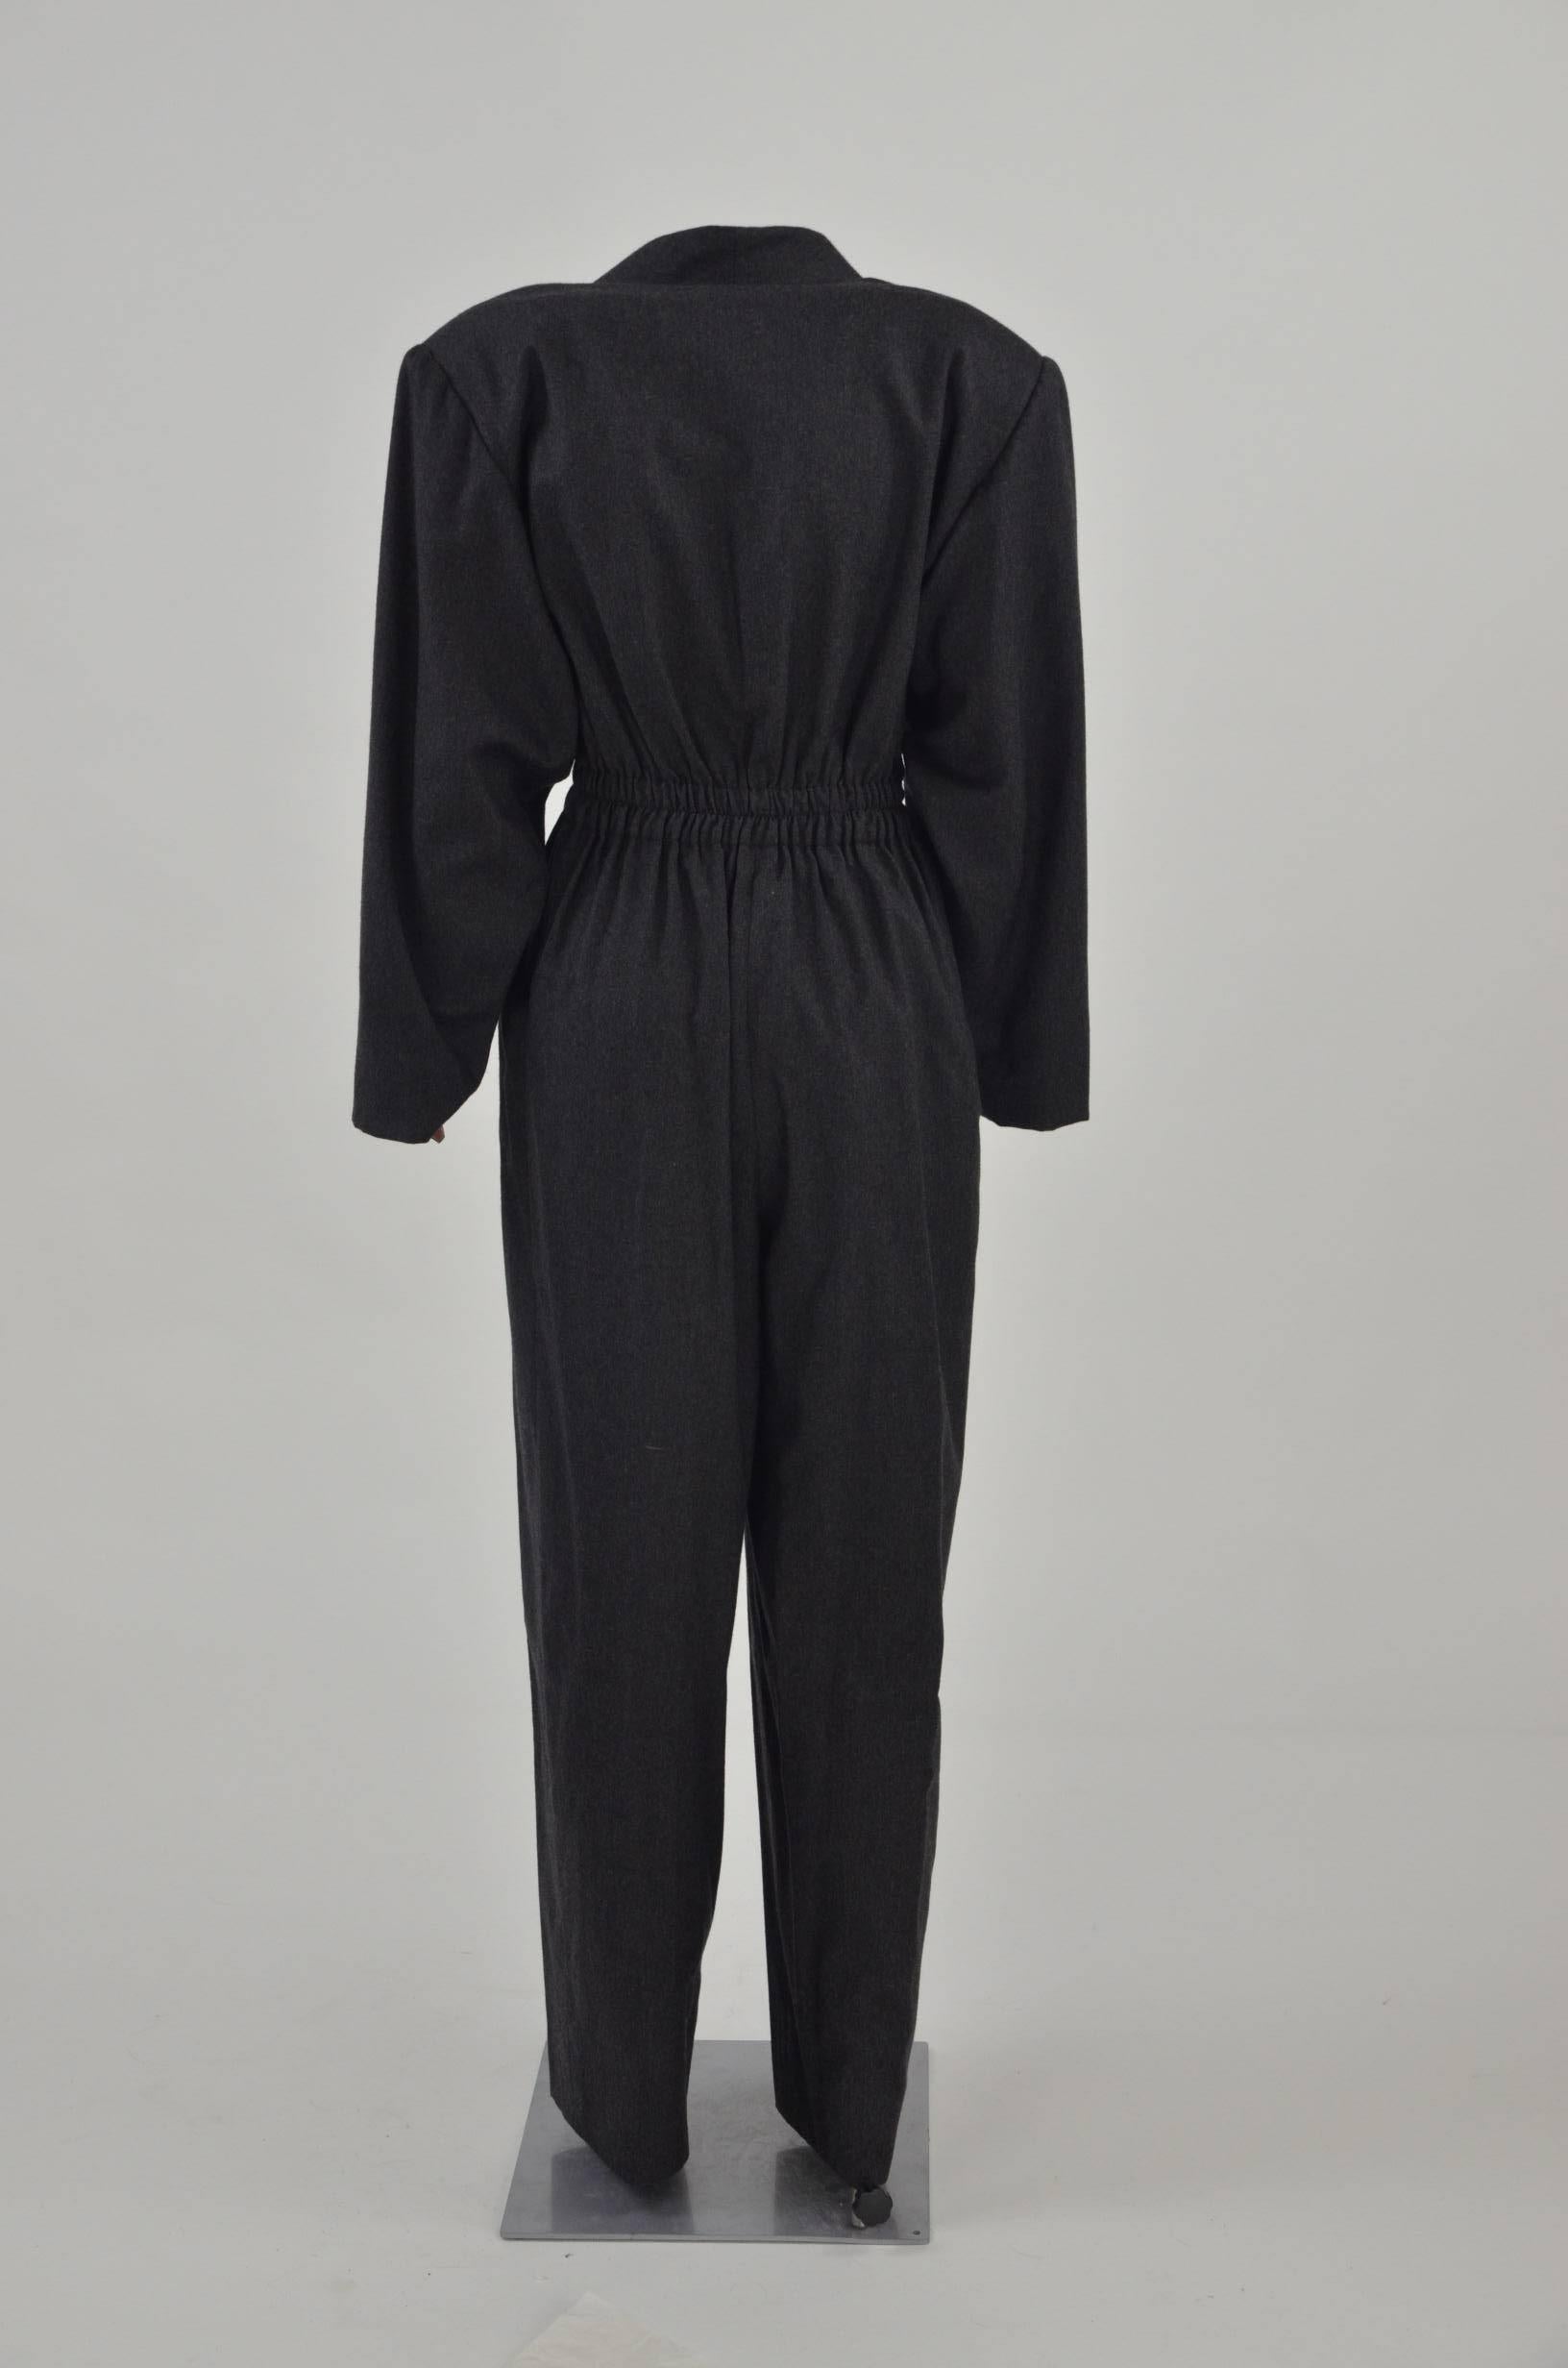 Grey wool and cashmere jumpsuit from Hermès with a wrap style front, a belted waist, long sleeves, a loose fit, a wide leg and side pockets. 
Please note that this item has some minor defeacts, as the pictures show. 
Size 40 FR.

Measurements: